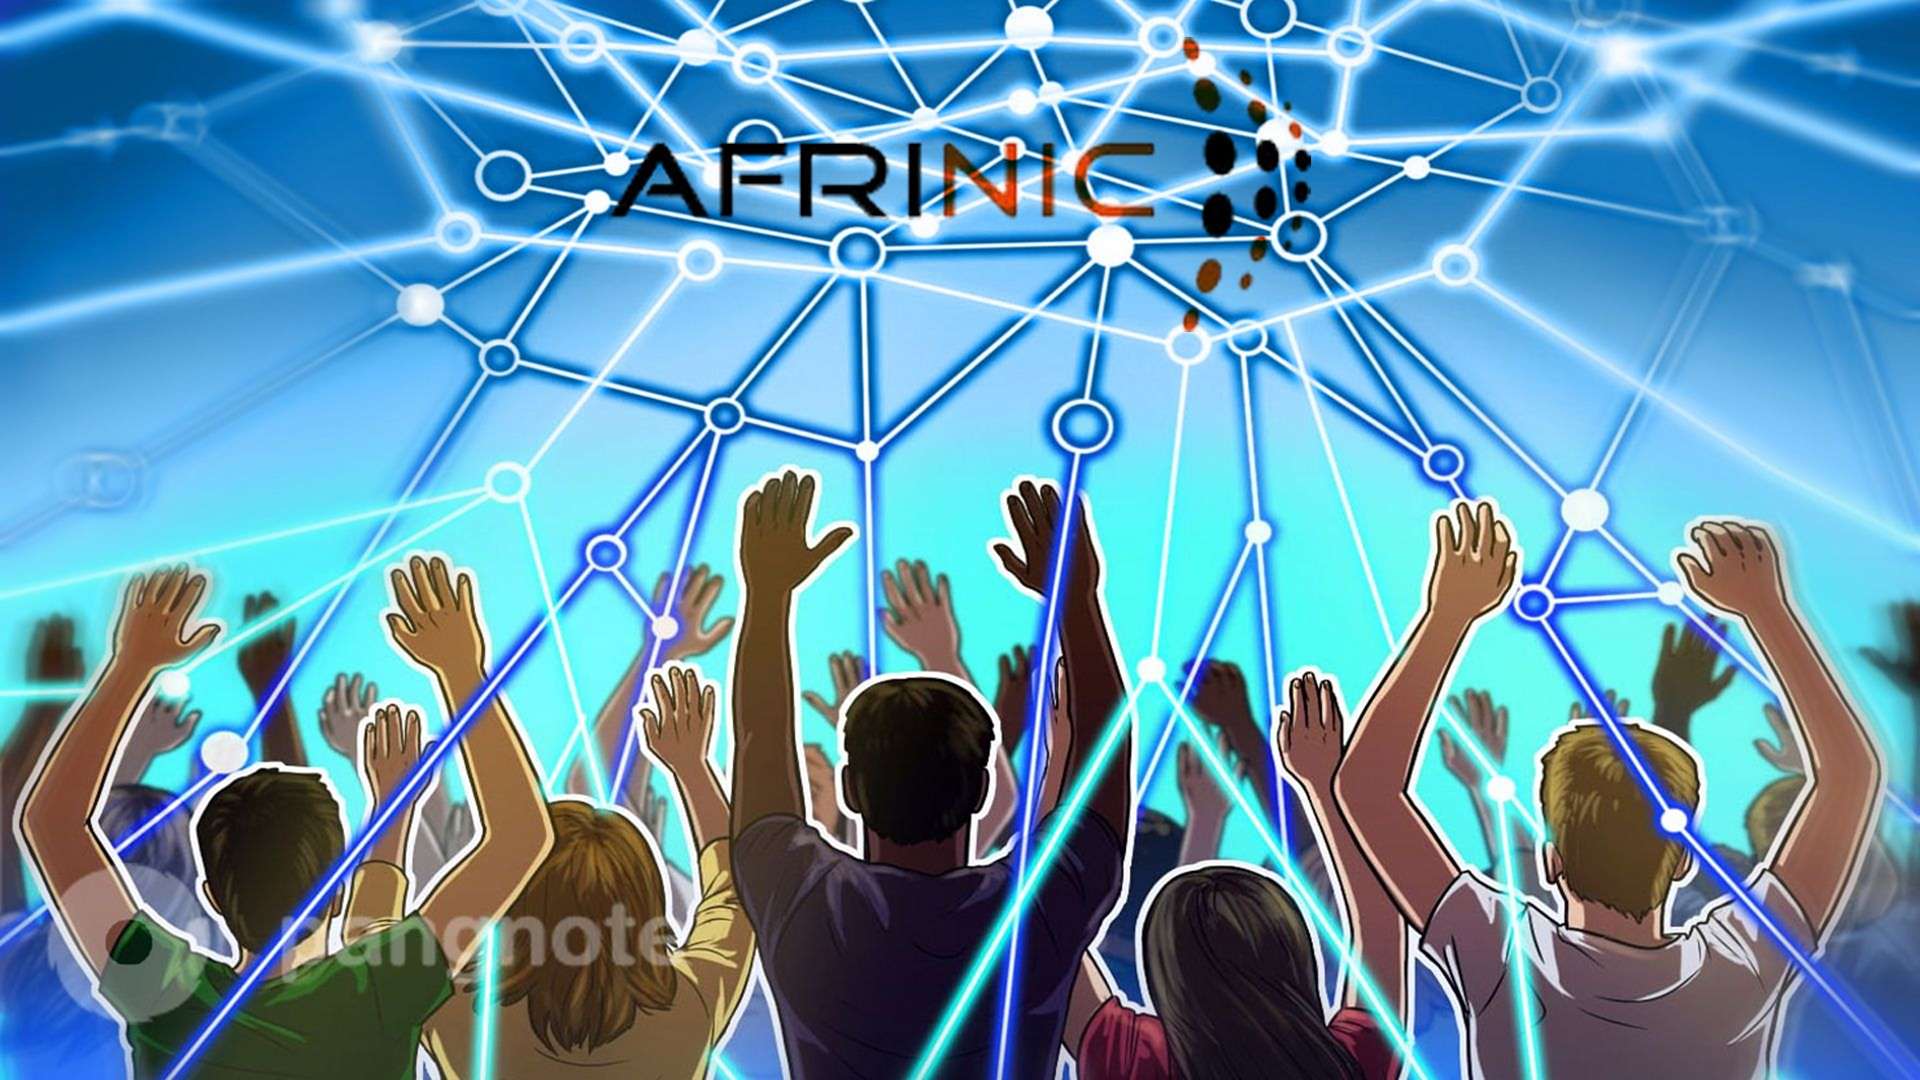 AFRINIC can return a large pool of addresses that were assigned by their employee 